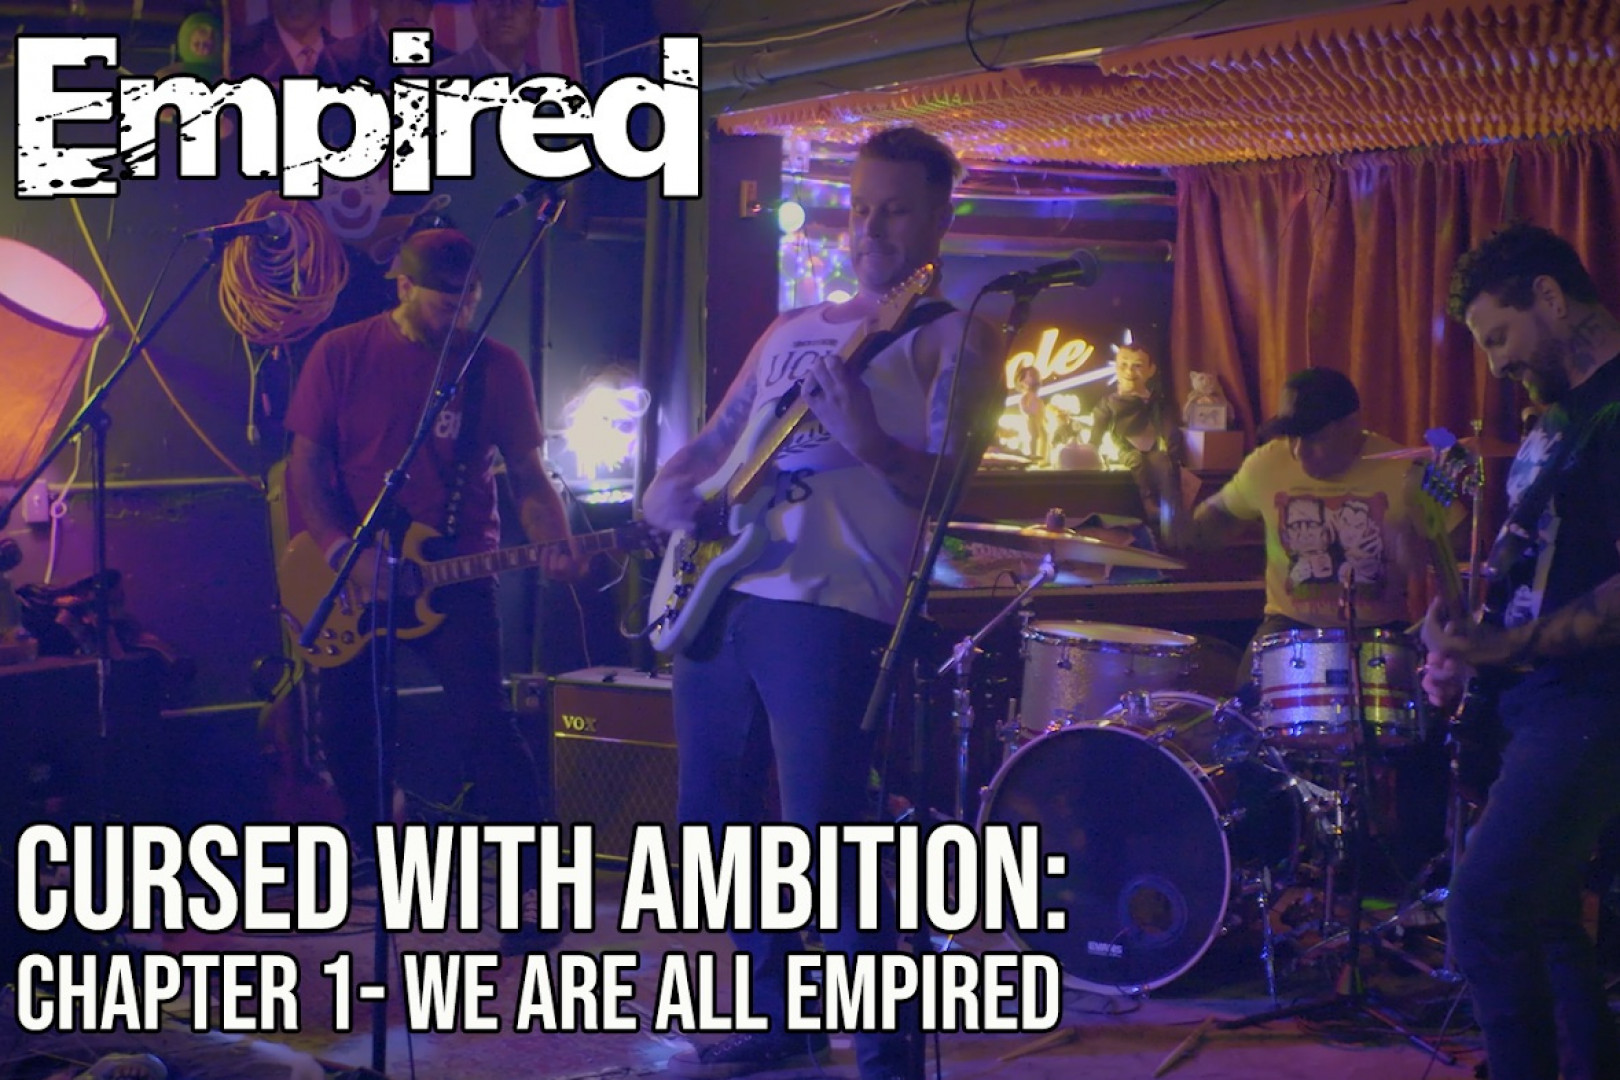 Check out the first episode of Empired's tour documentary!